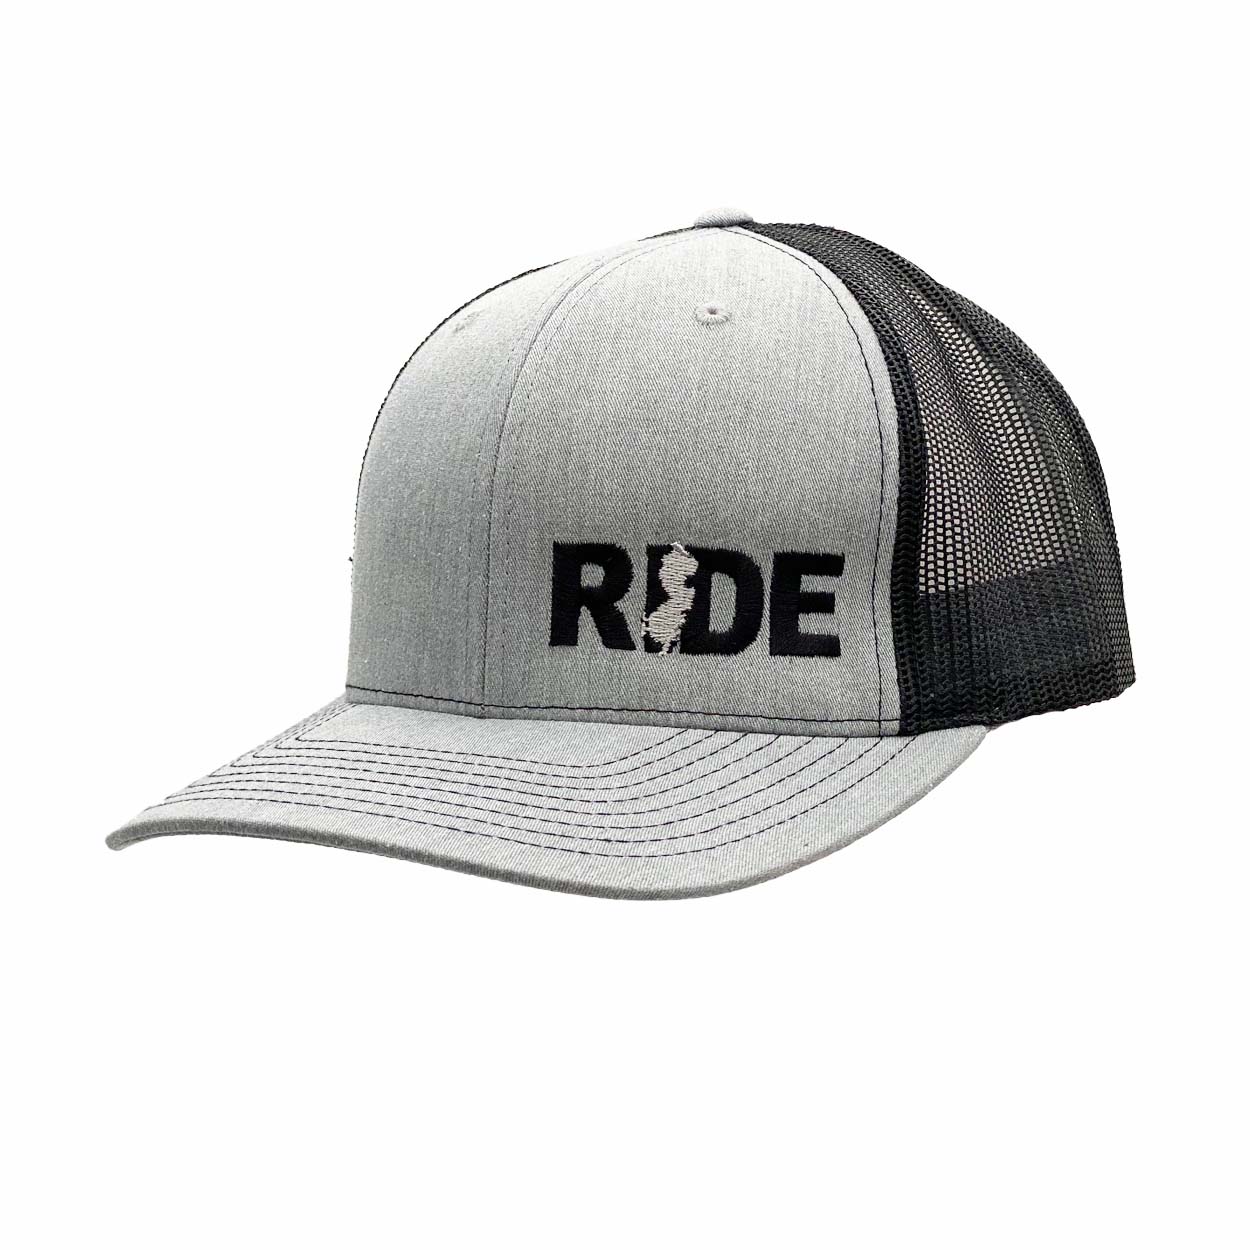 Ride New Jersey Night Out  Embroidered Snapback Trucker Hat Heather Gray/Black